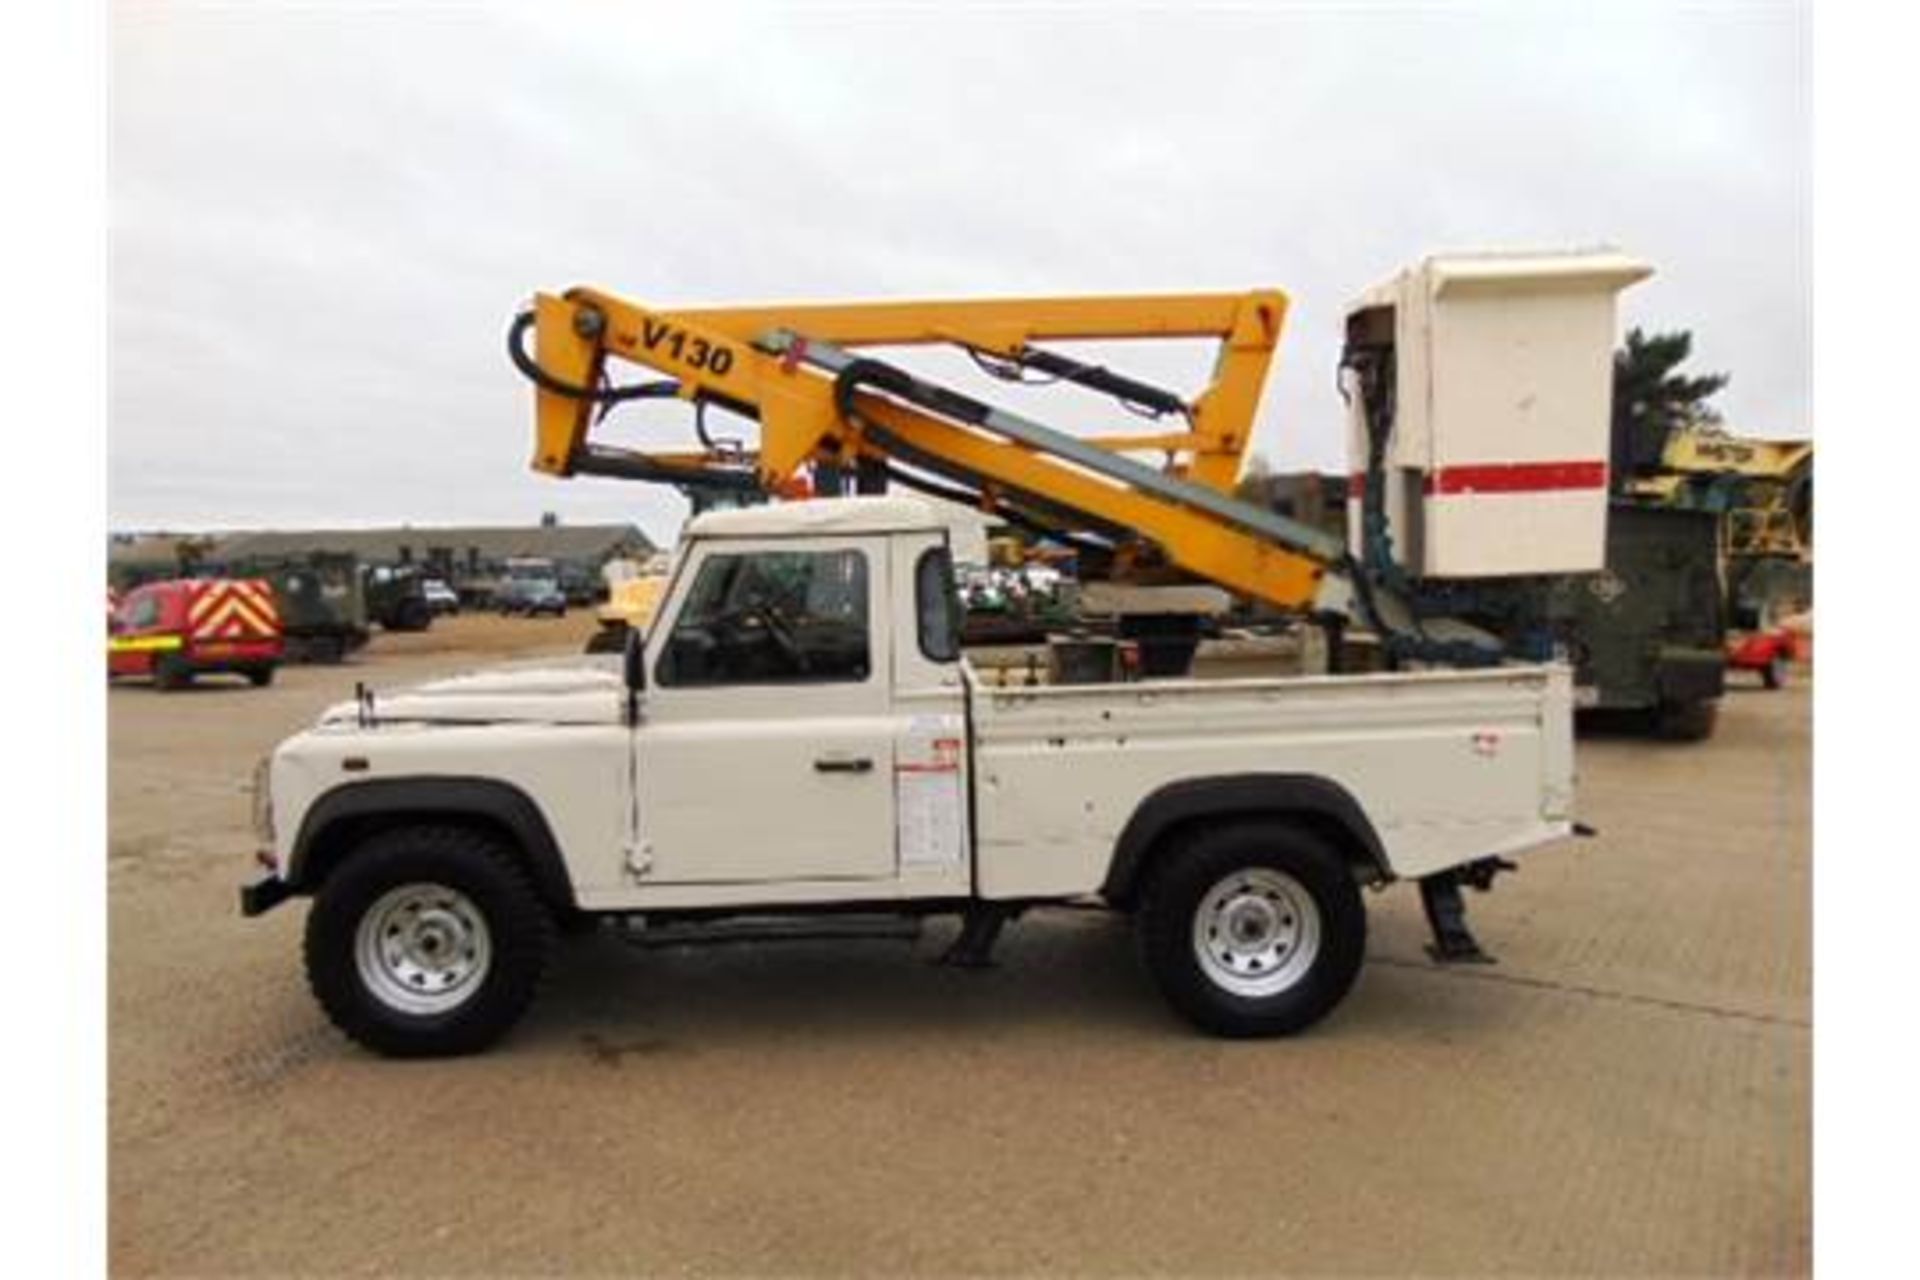 Land Rover Defender 110 High Capacity Cherry Picker - Image 7 of 34